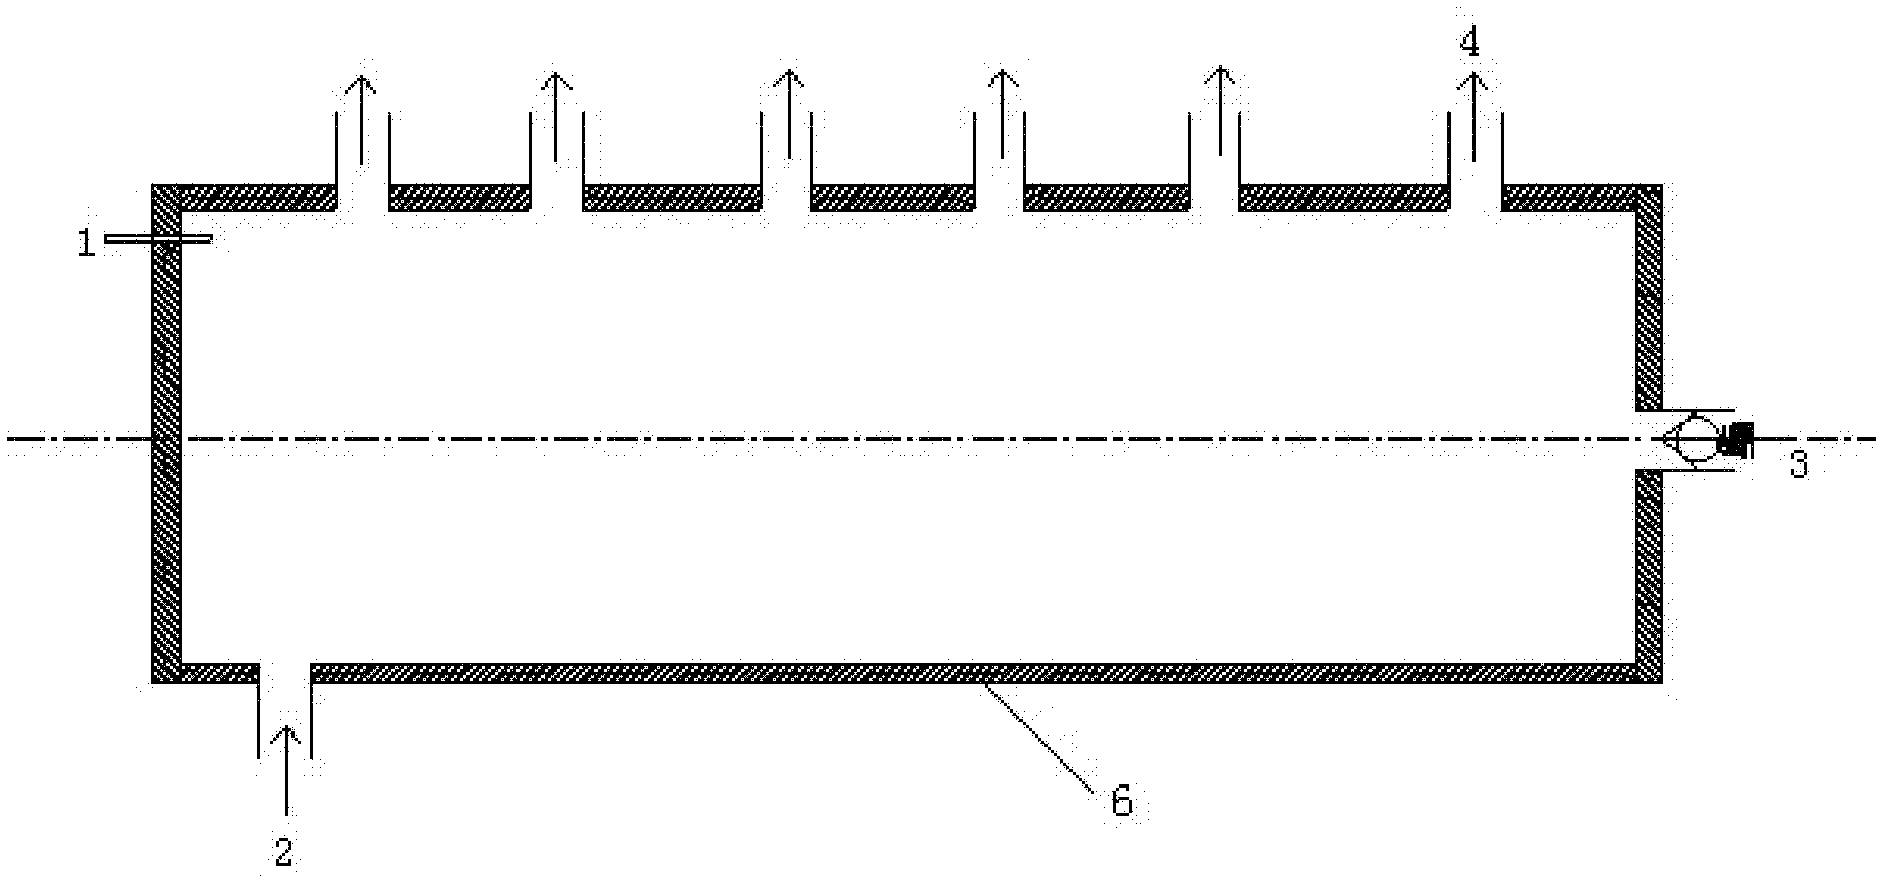 High pressure common rail device with variable high pressure volume for high pressure common rail fuel system